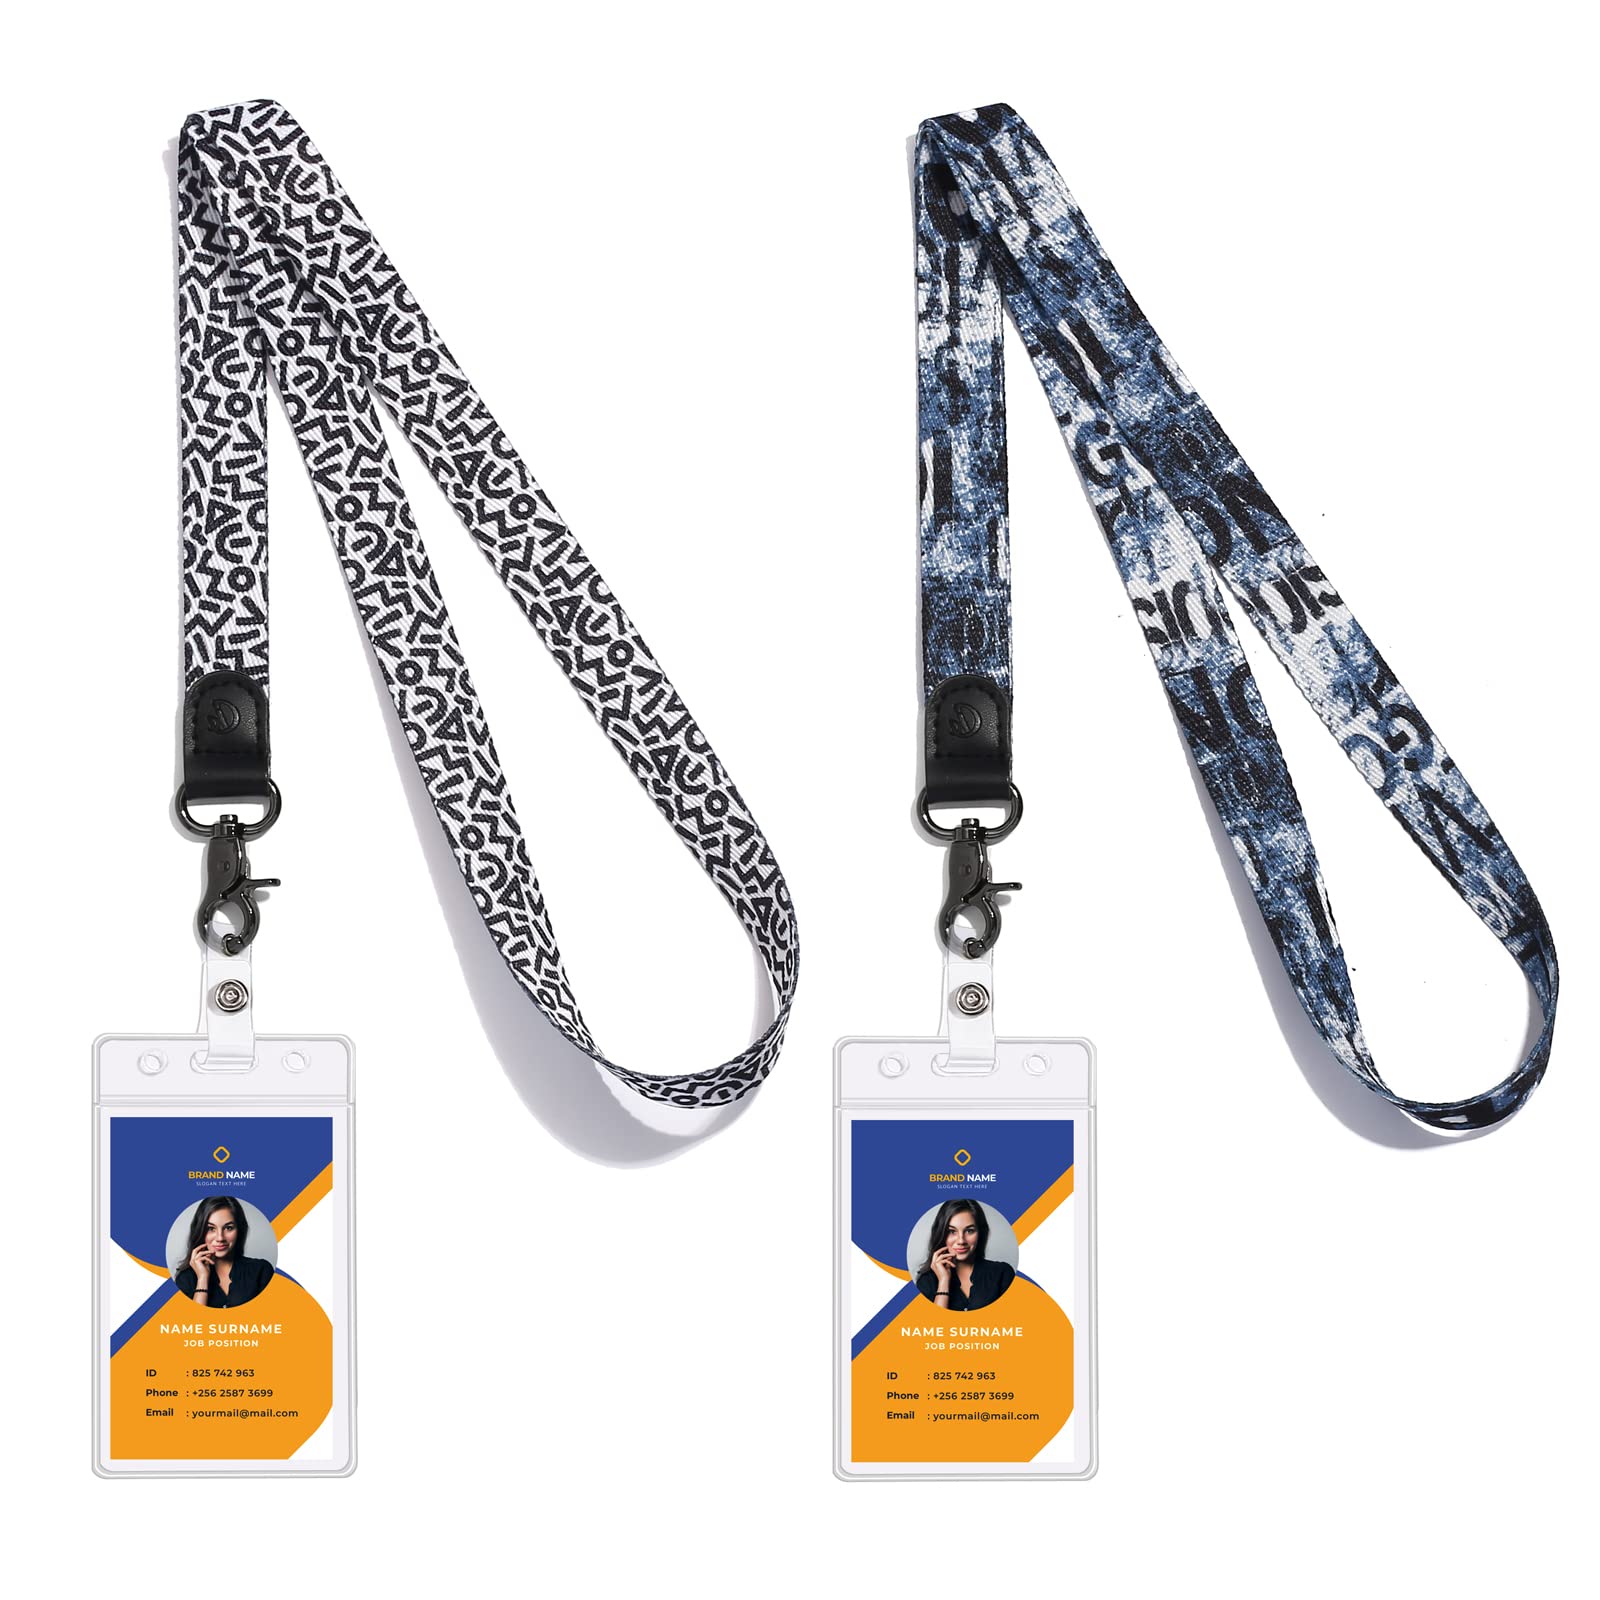 Doooze Lanyard Id Holder Neck Strap Lanyards With Waterproof Id Badge Holder Used For Id Badge Cruises Cell Phone Key